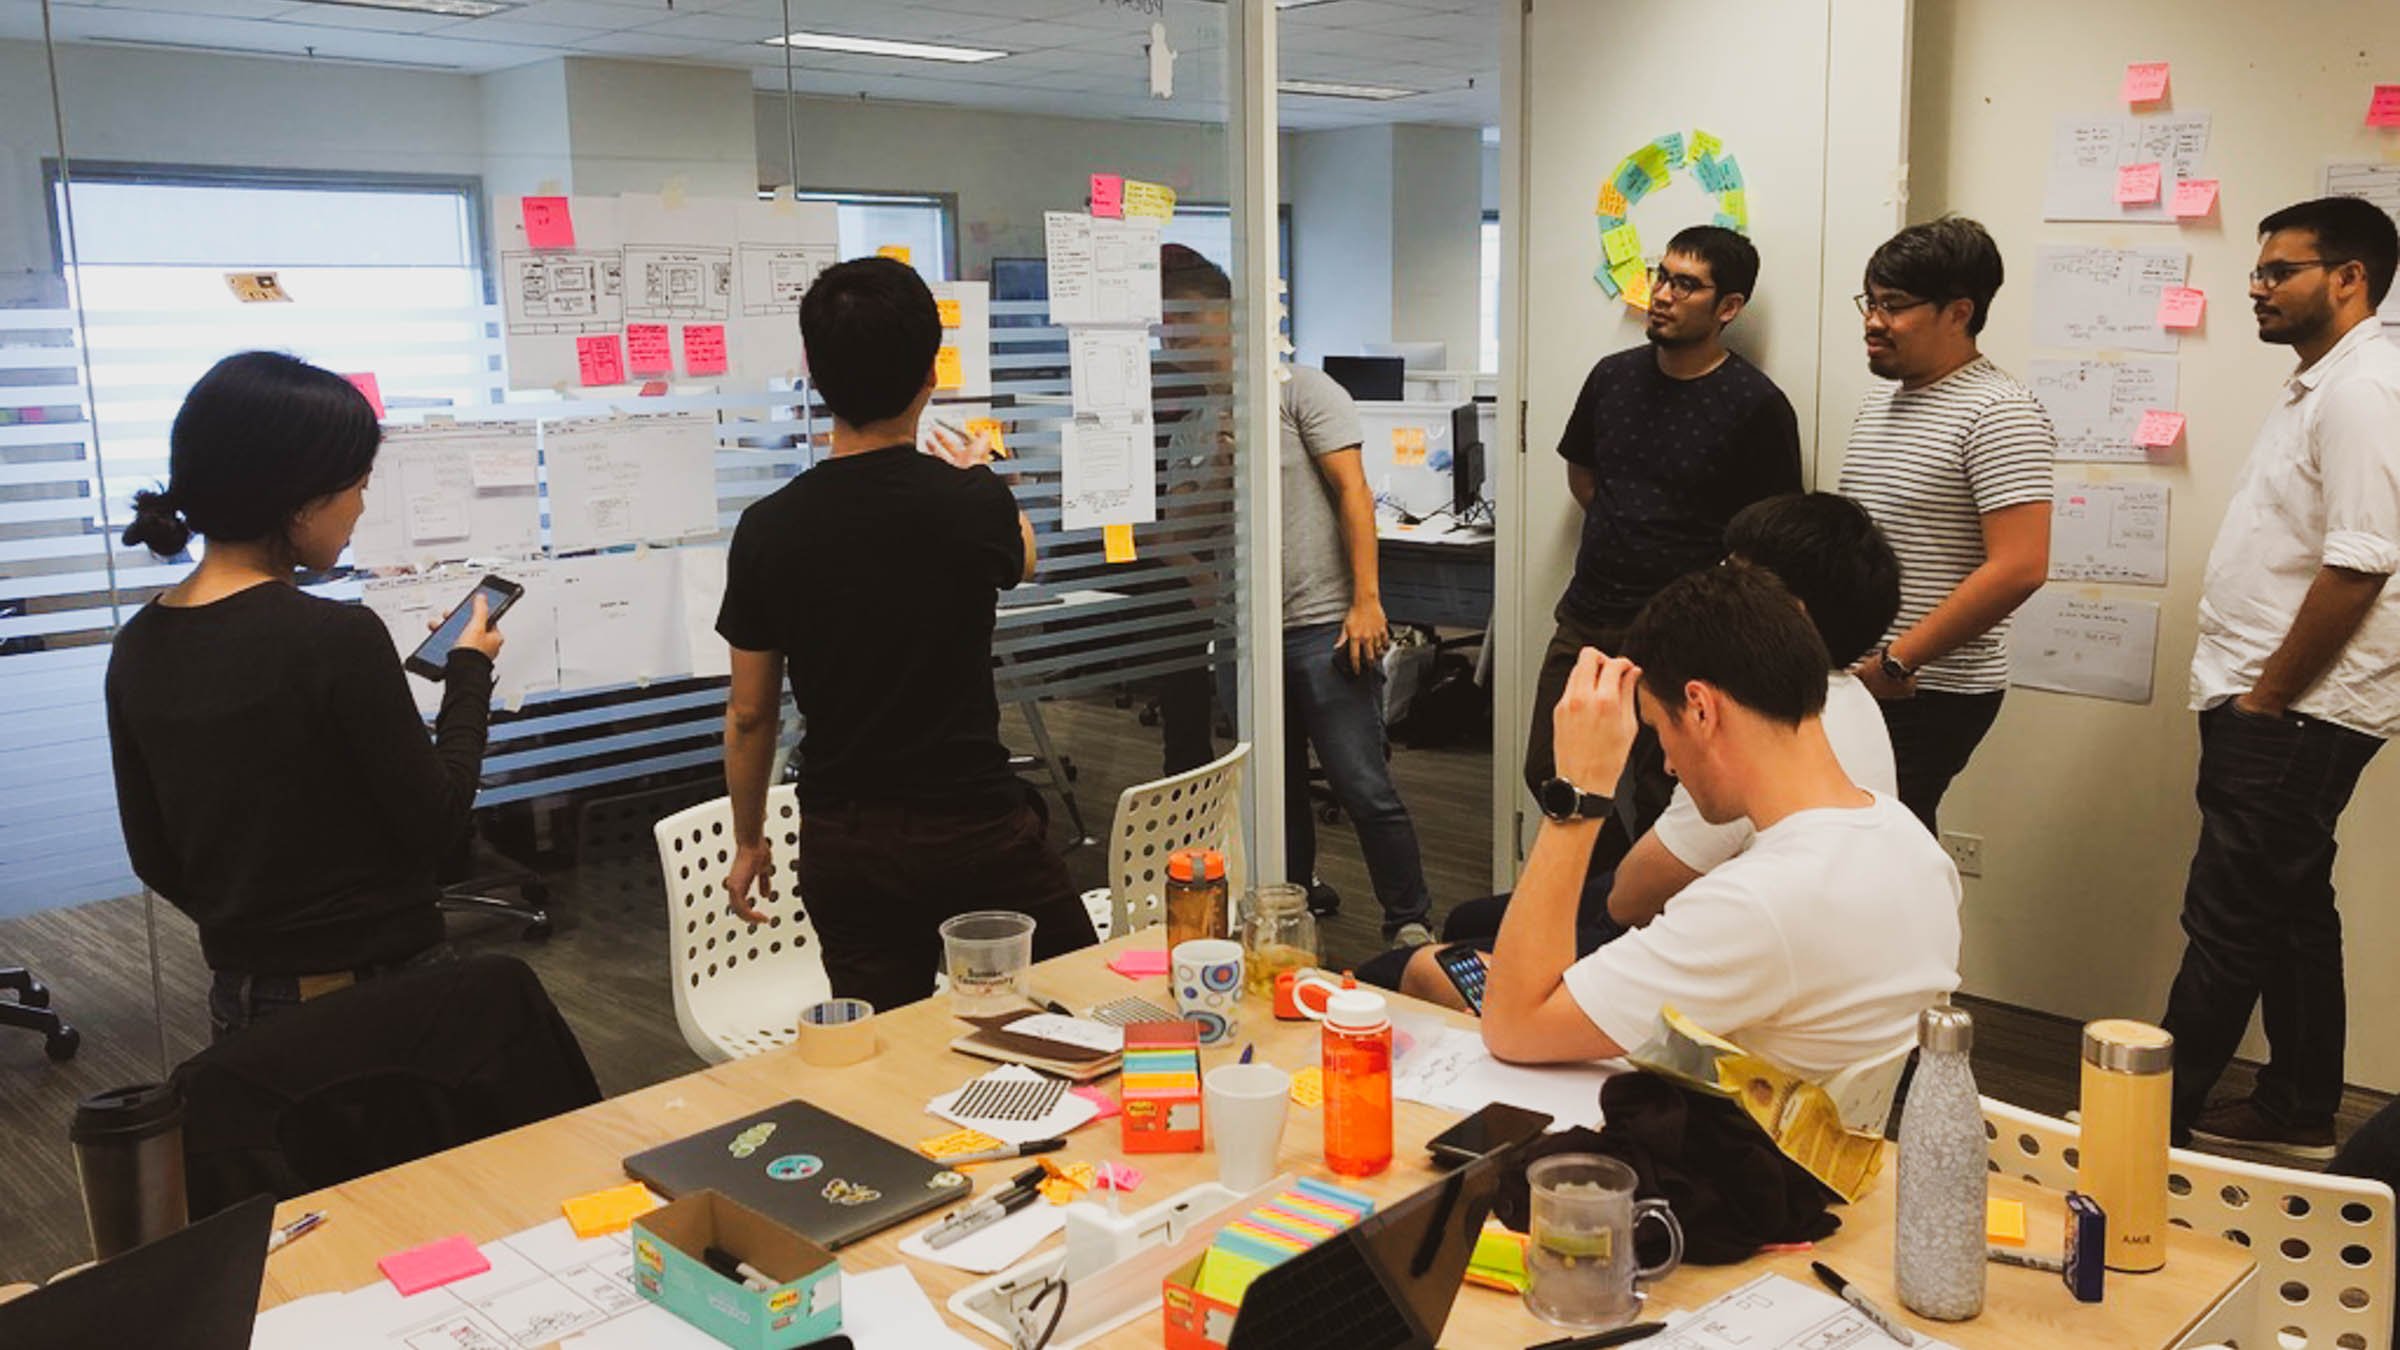 A (pre-pandemic) design sprint session with our engineers, designer, and PM